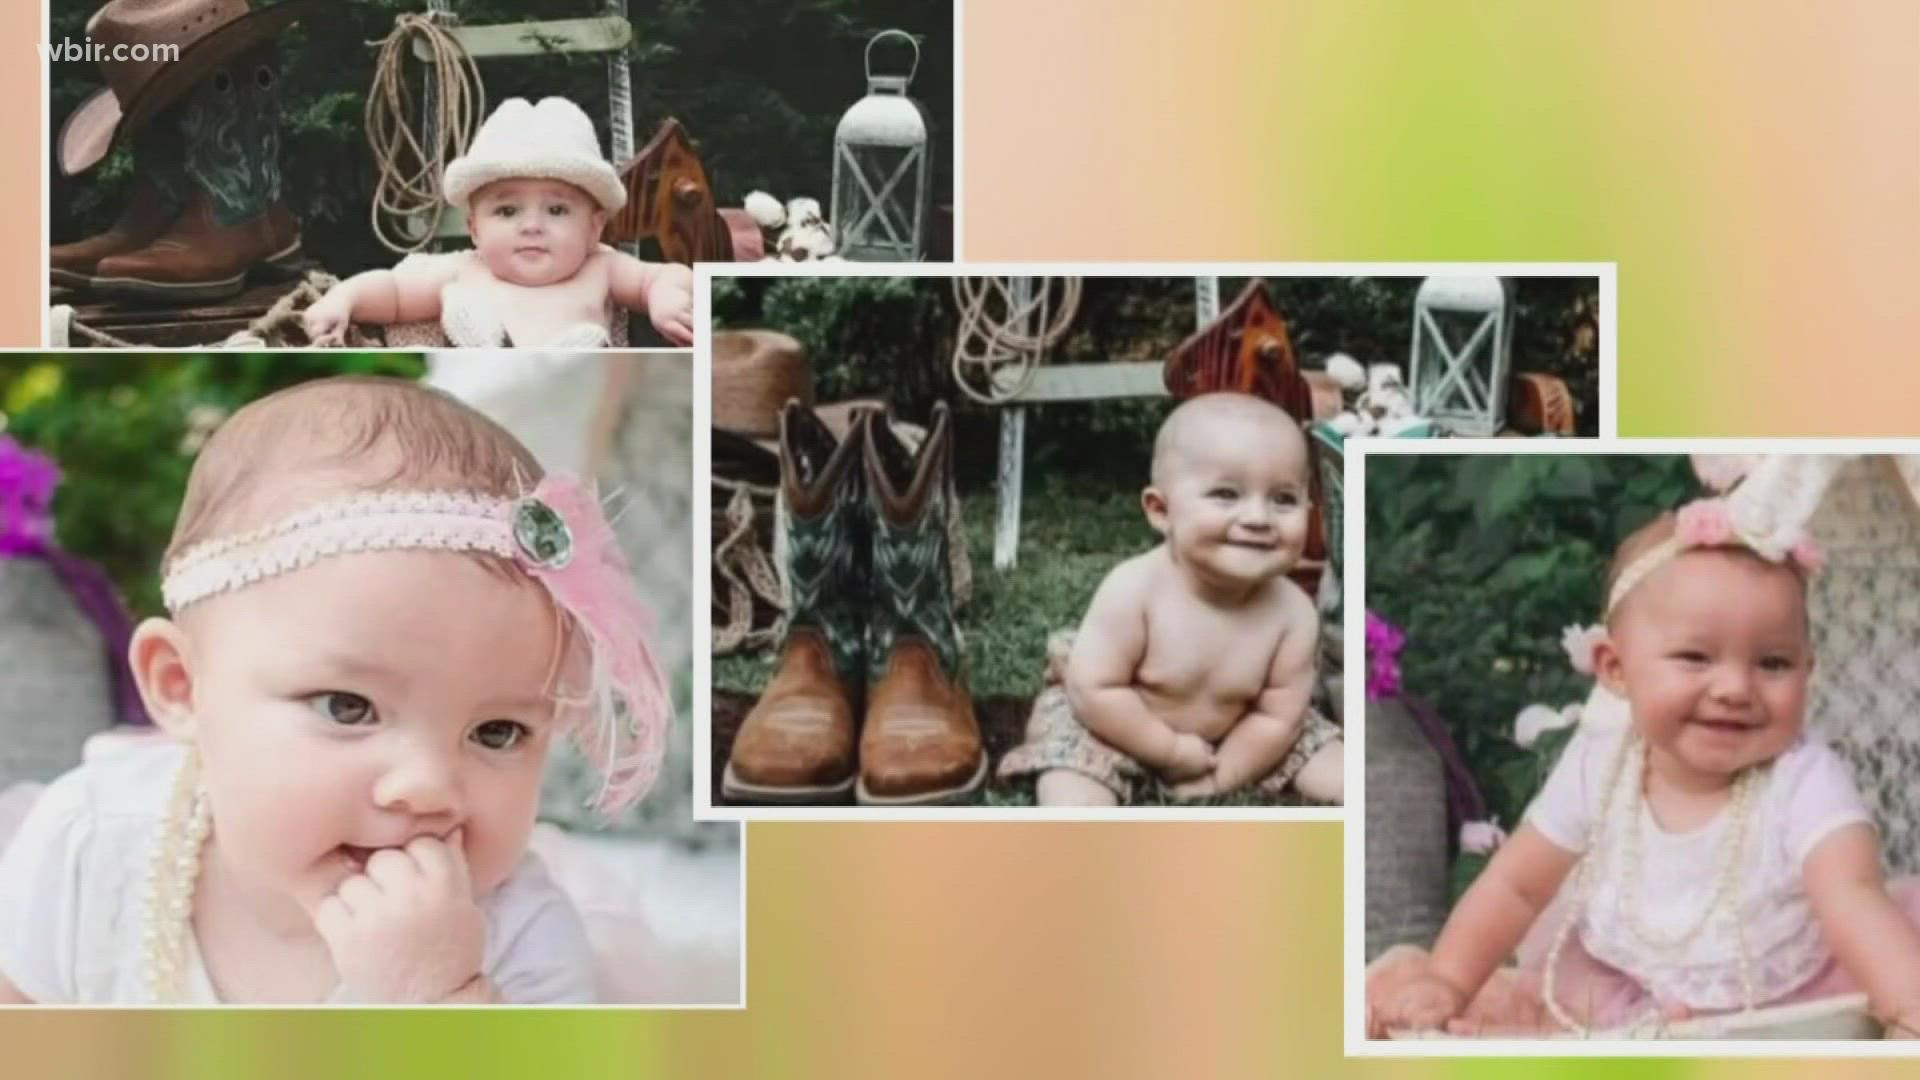 A Tennessee family is mourning the death of baby twins killed in this weekend's flooding.